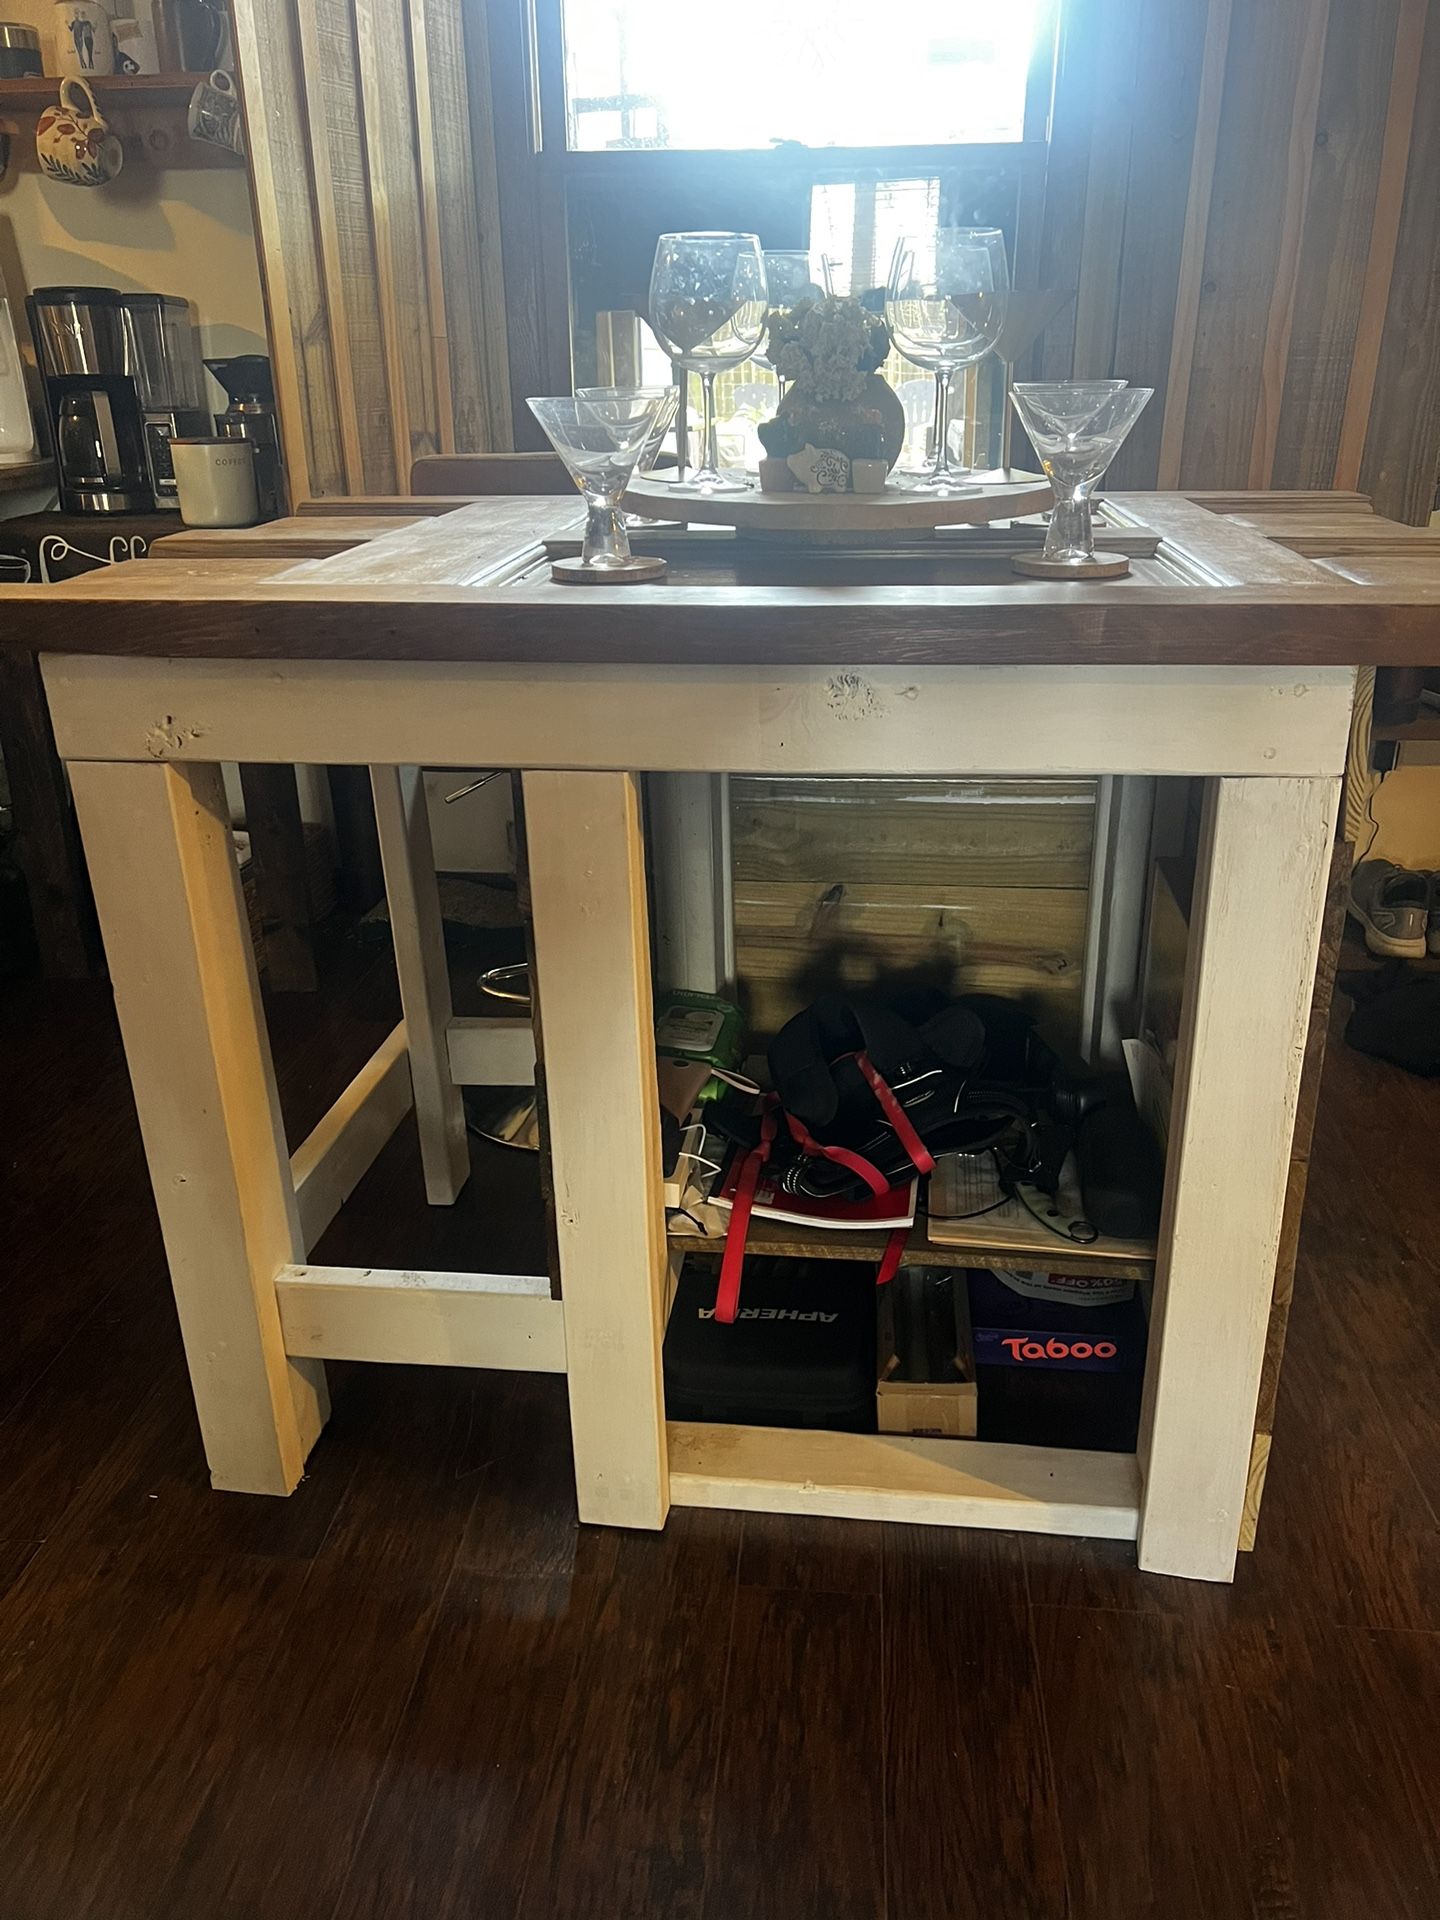 Hand Crafted Kitchen Island/dining Table/bartop with Solid Wood Door Counter. Storage Underneath. Rustic